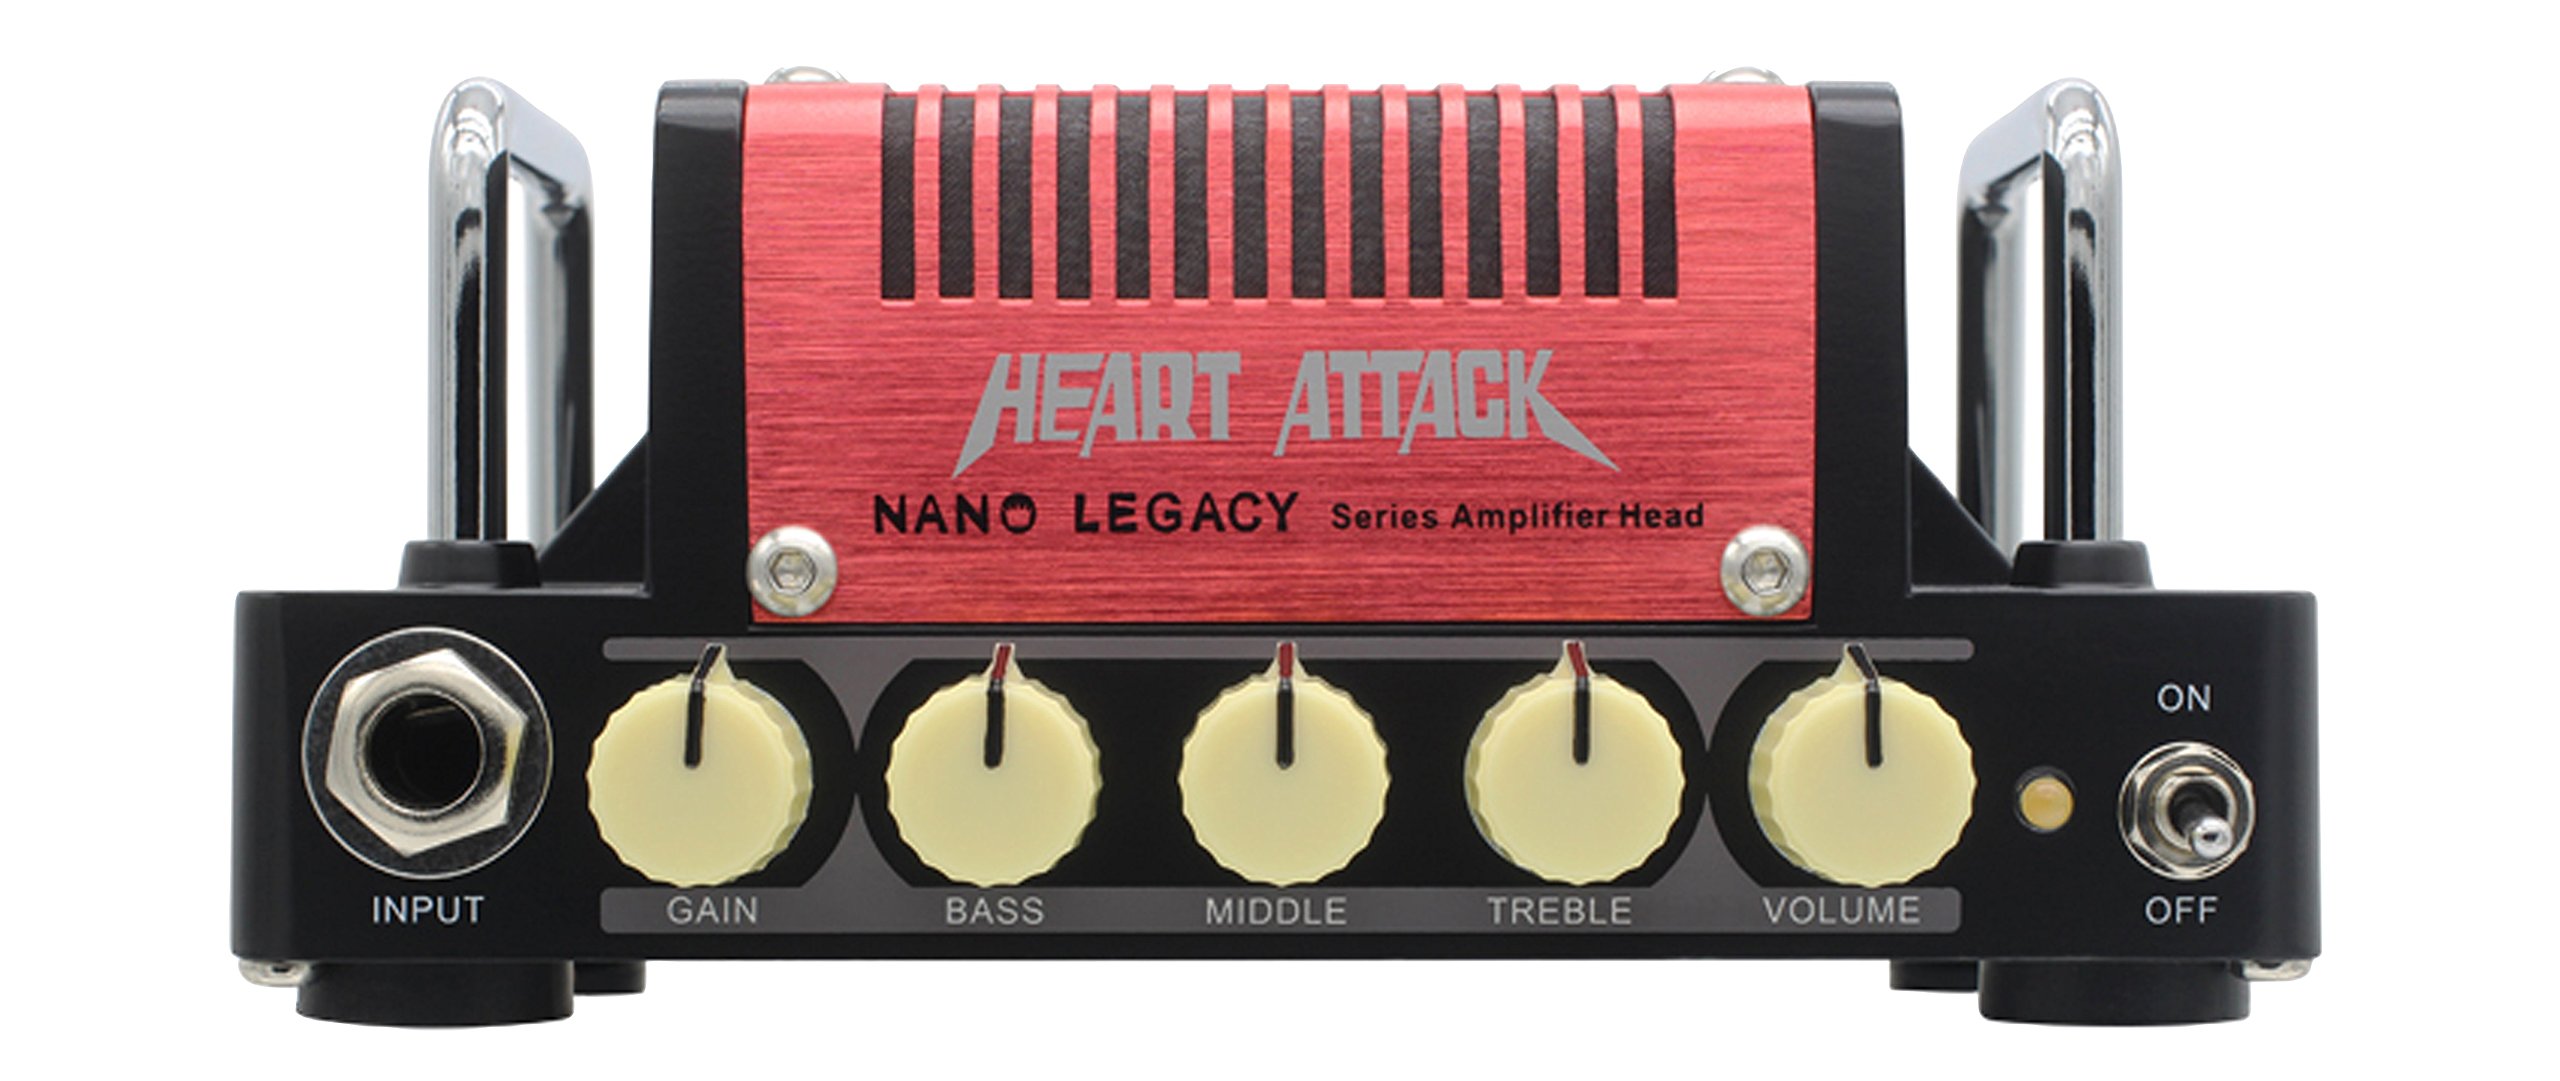 Hotone Nano Legacy Heart Attack Portable Guitar Amplifier Head - Red - image 1 of 2